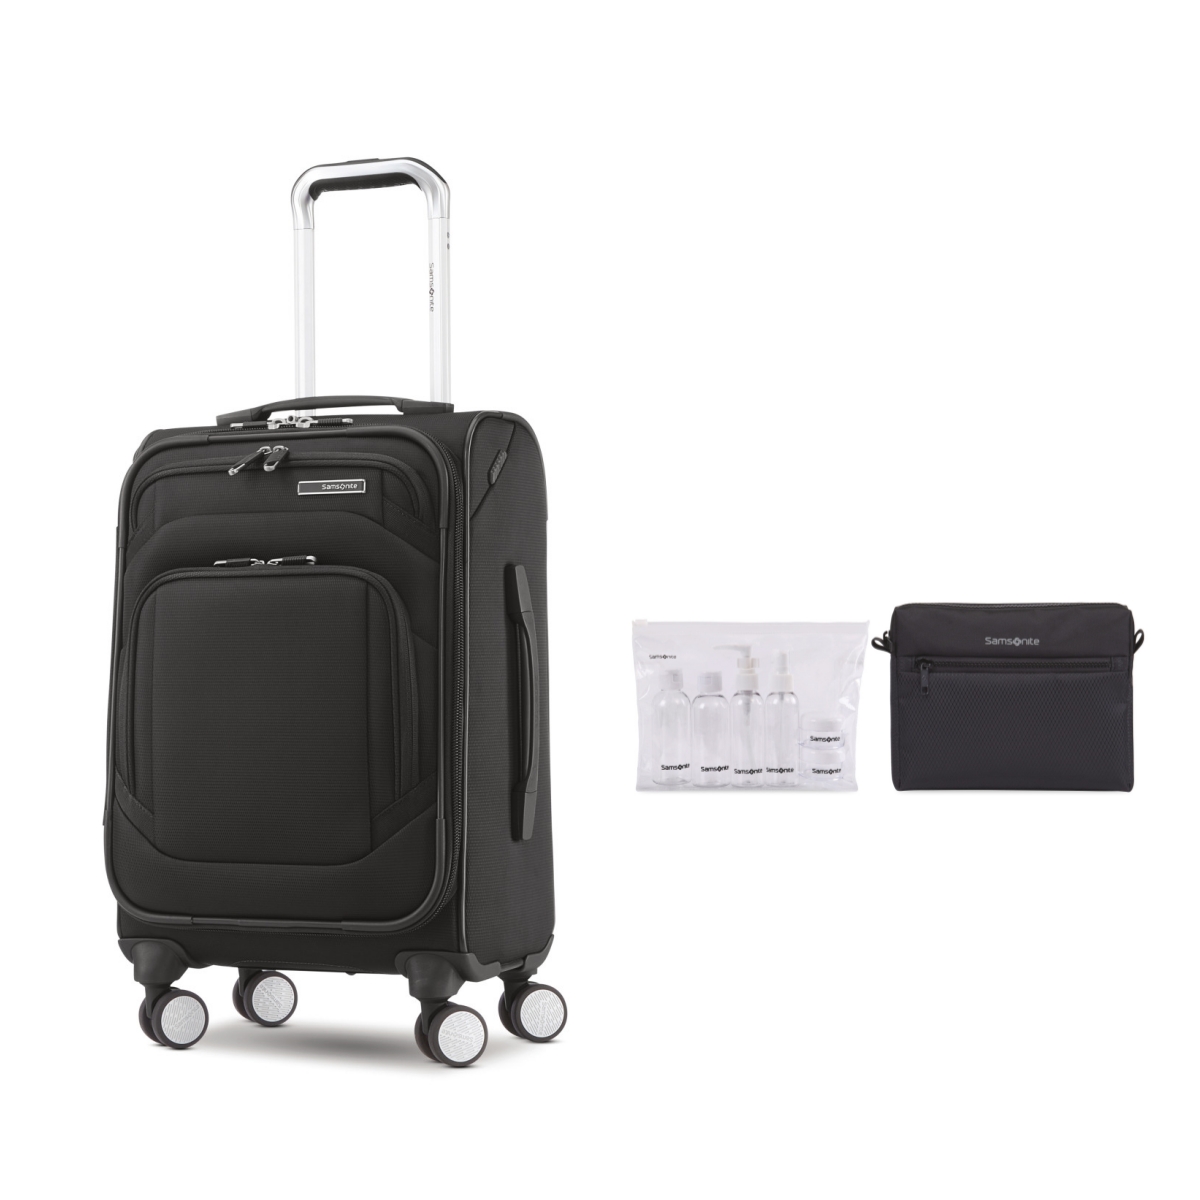 Samsonite 102000 - Ascentra Carry-on Spinner and 6 Piece Travel Bottle Set